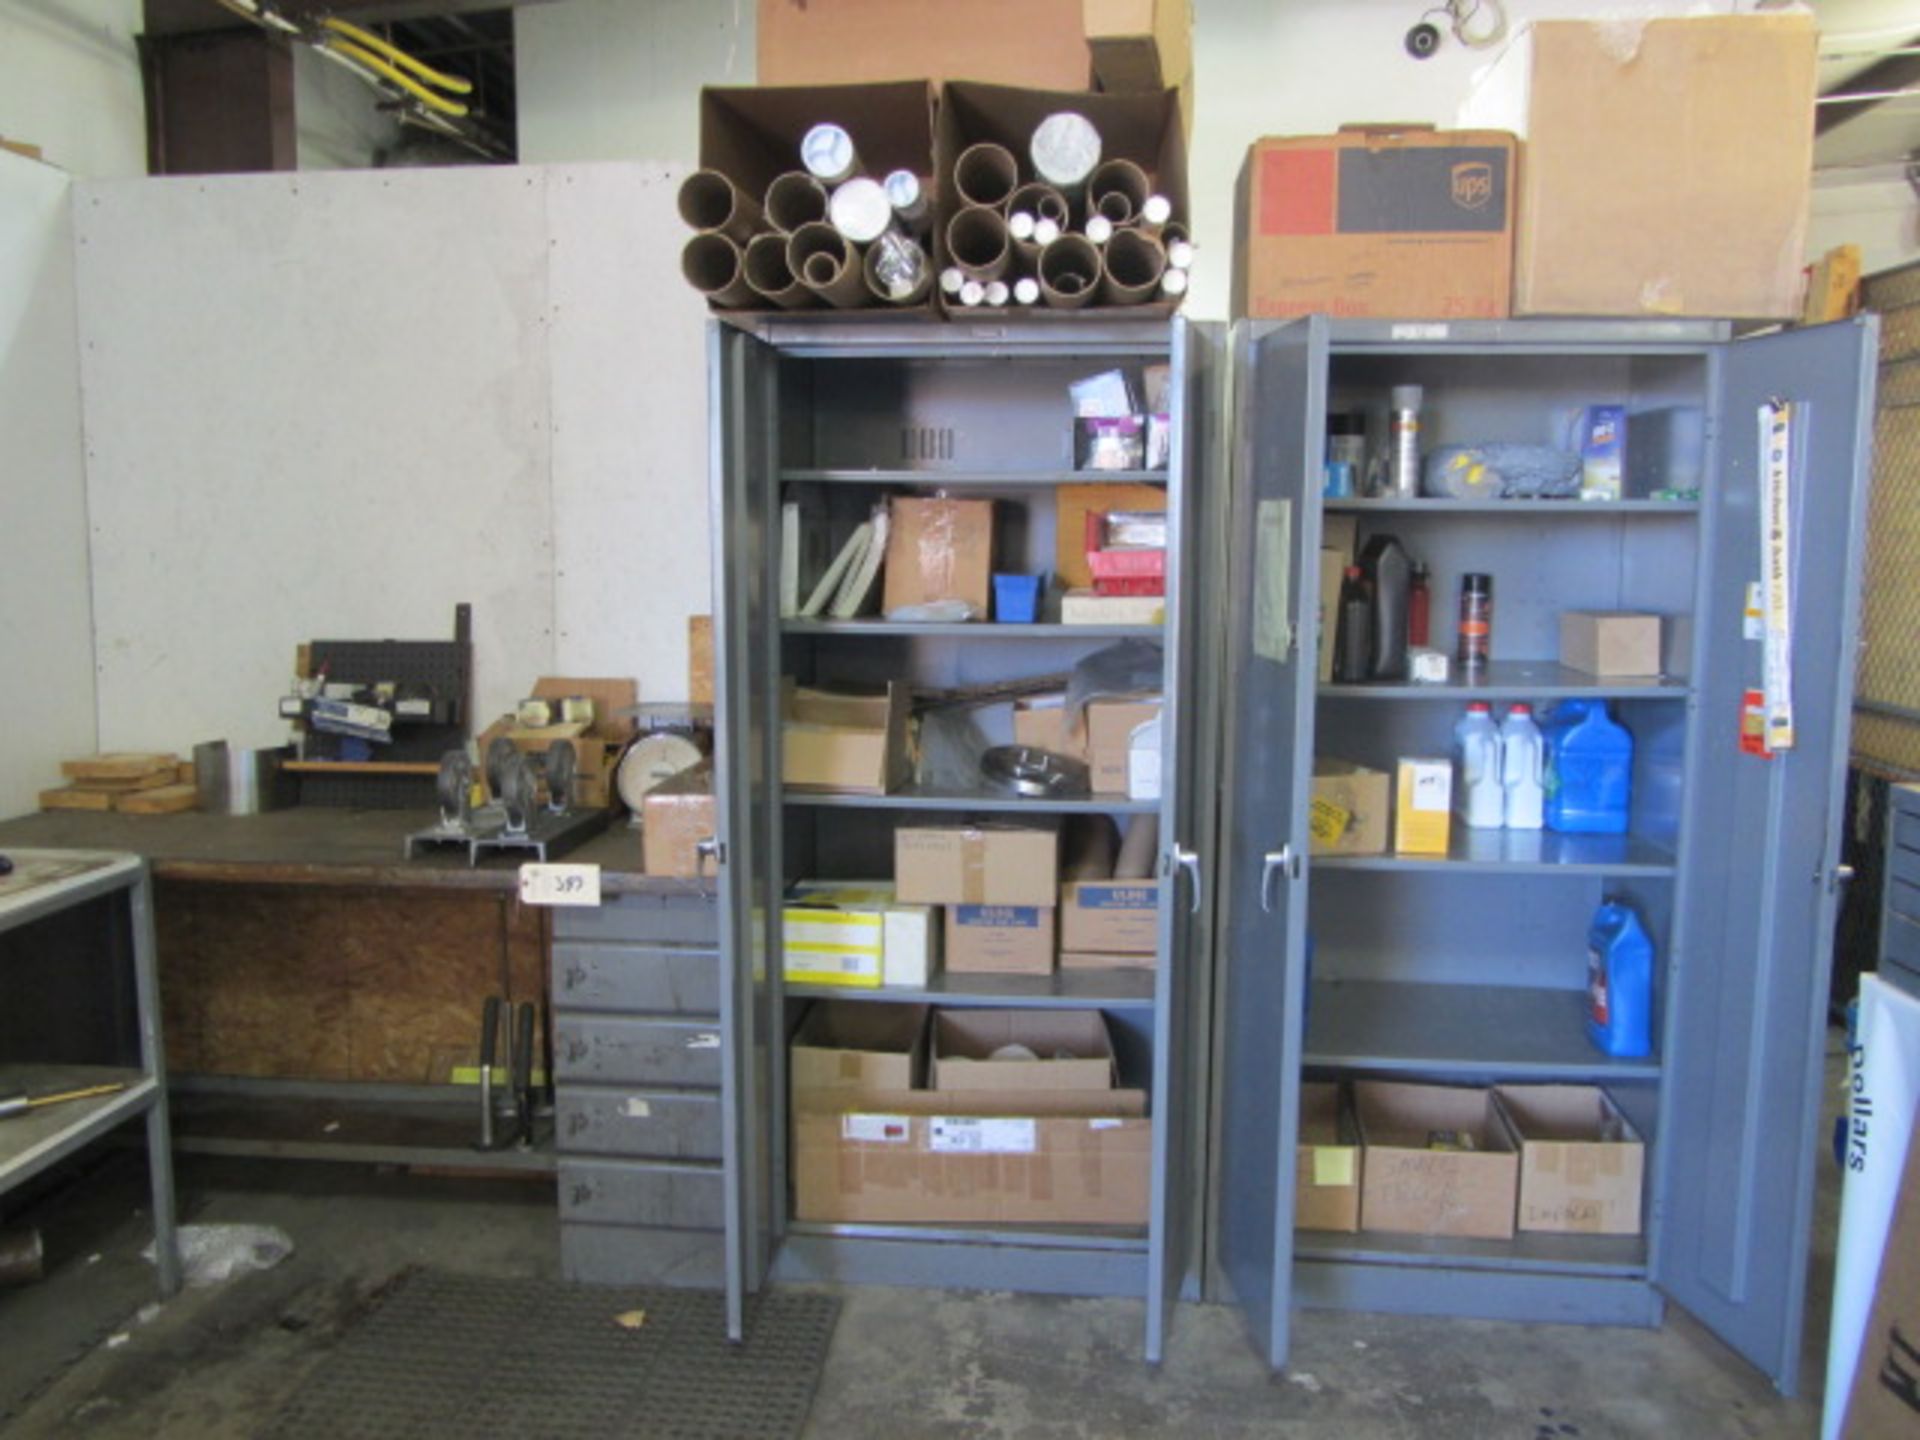 Contents of Shipping Area including (2) Cabinets, (2) Workbenches